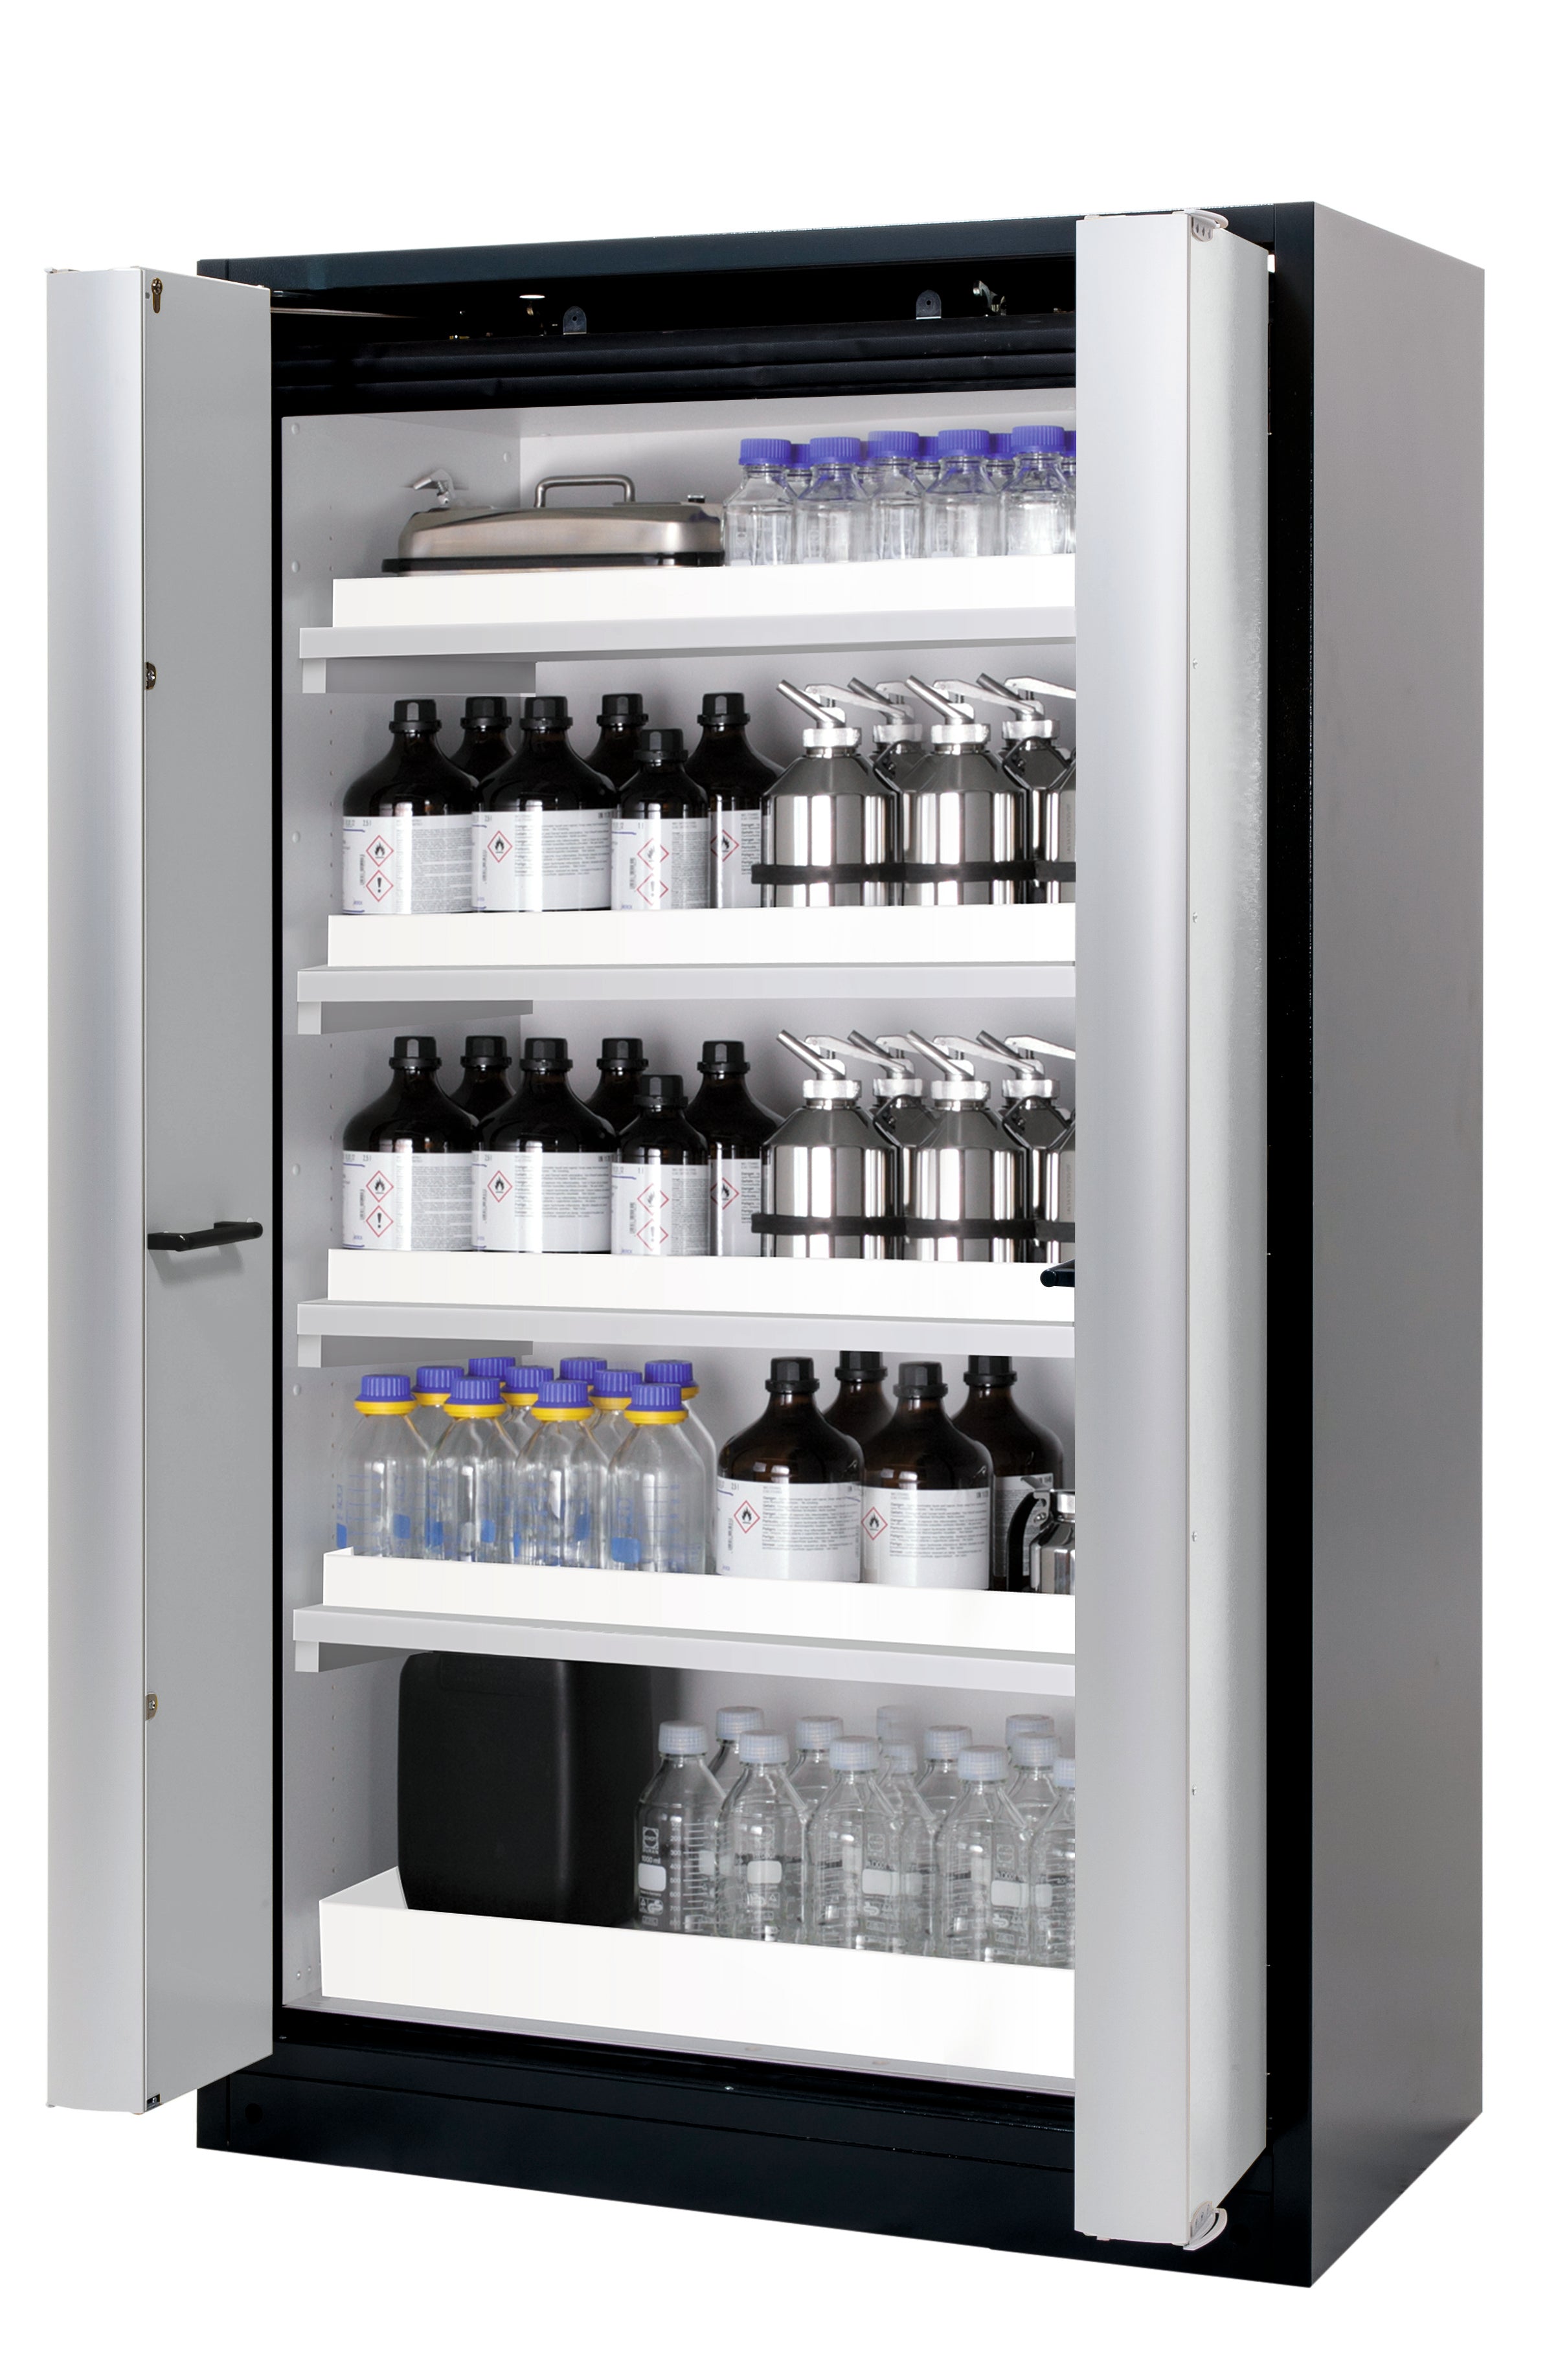 Type 90 safety cabinet Q-PHOENIX-90 model Q90.195.120.FD in light gray RAL 7035 with 4x standard tray base (polypropylene)